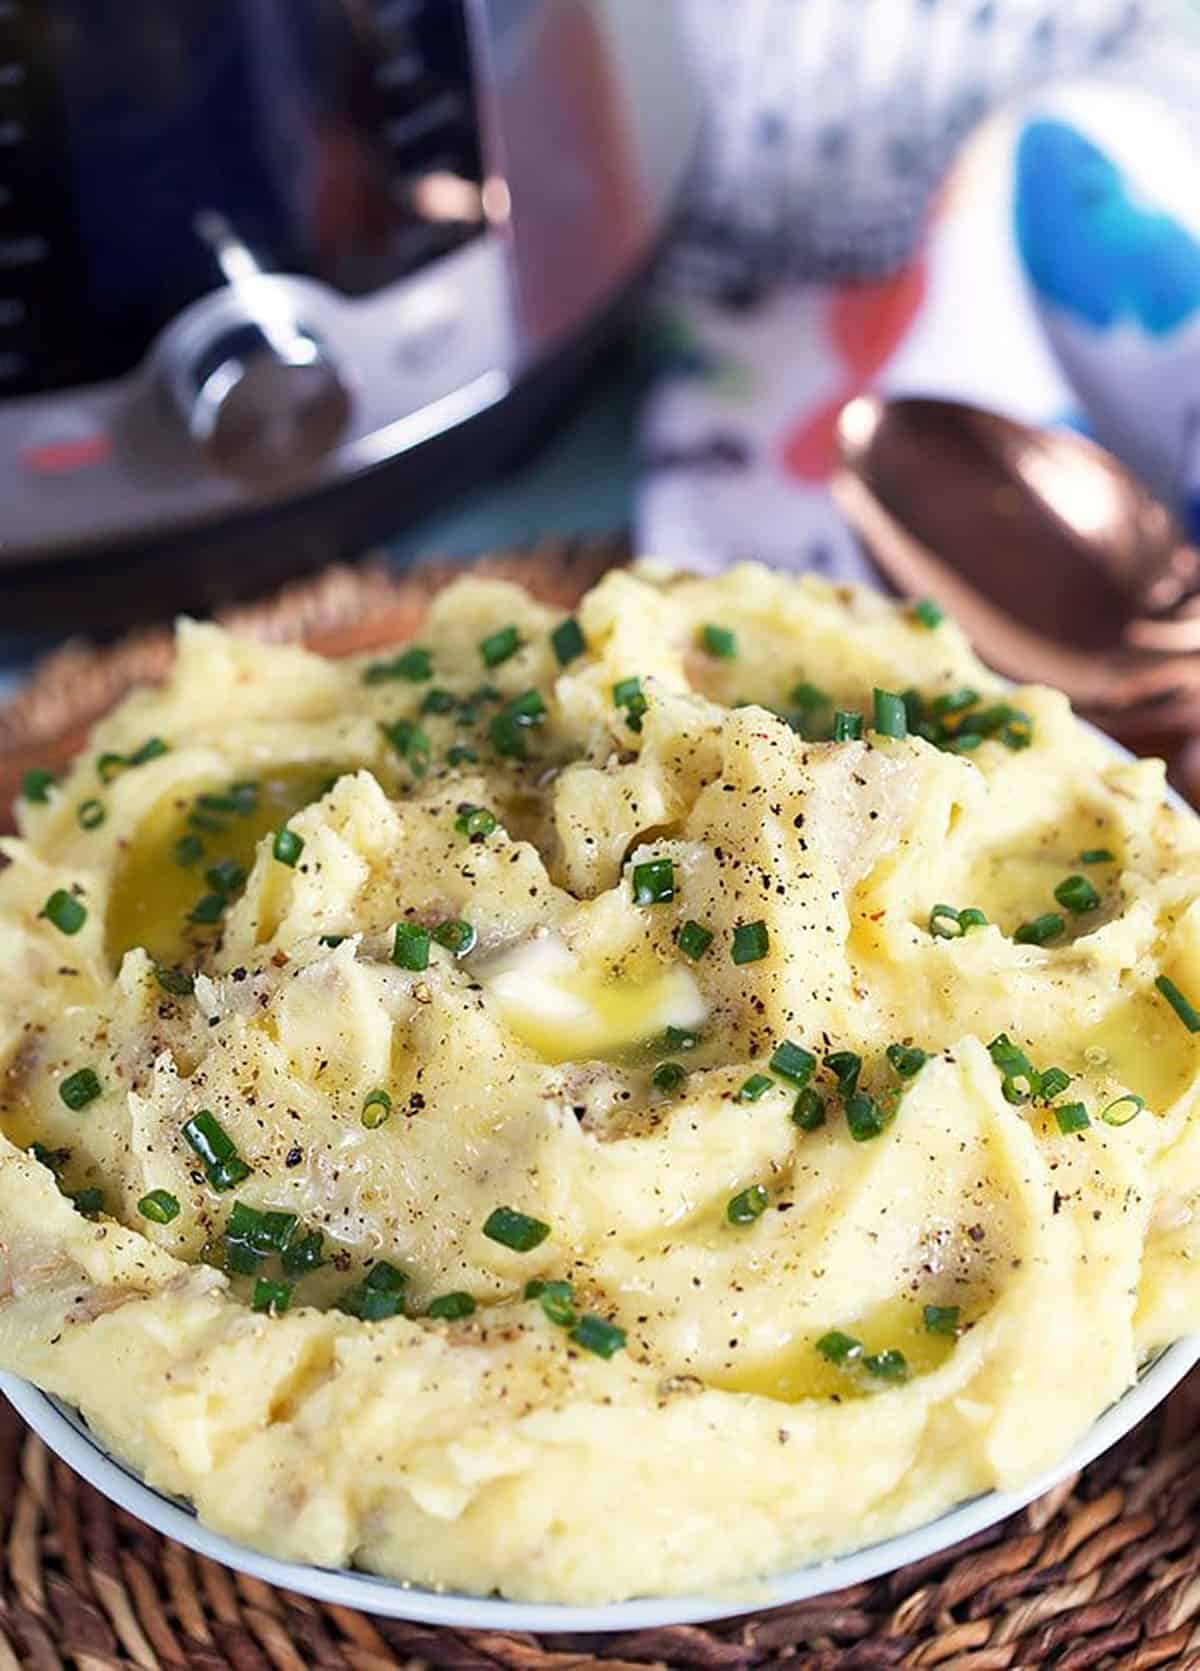 Mashed potatoes in a bowl with an instant pot in the background.